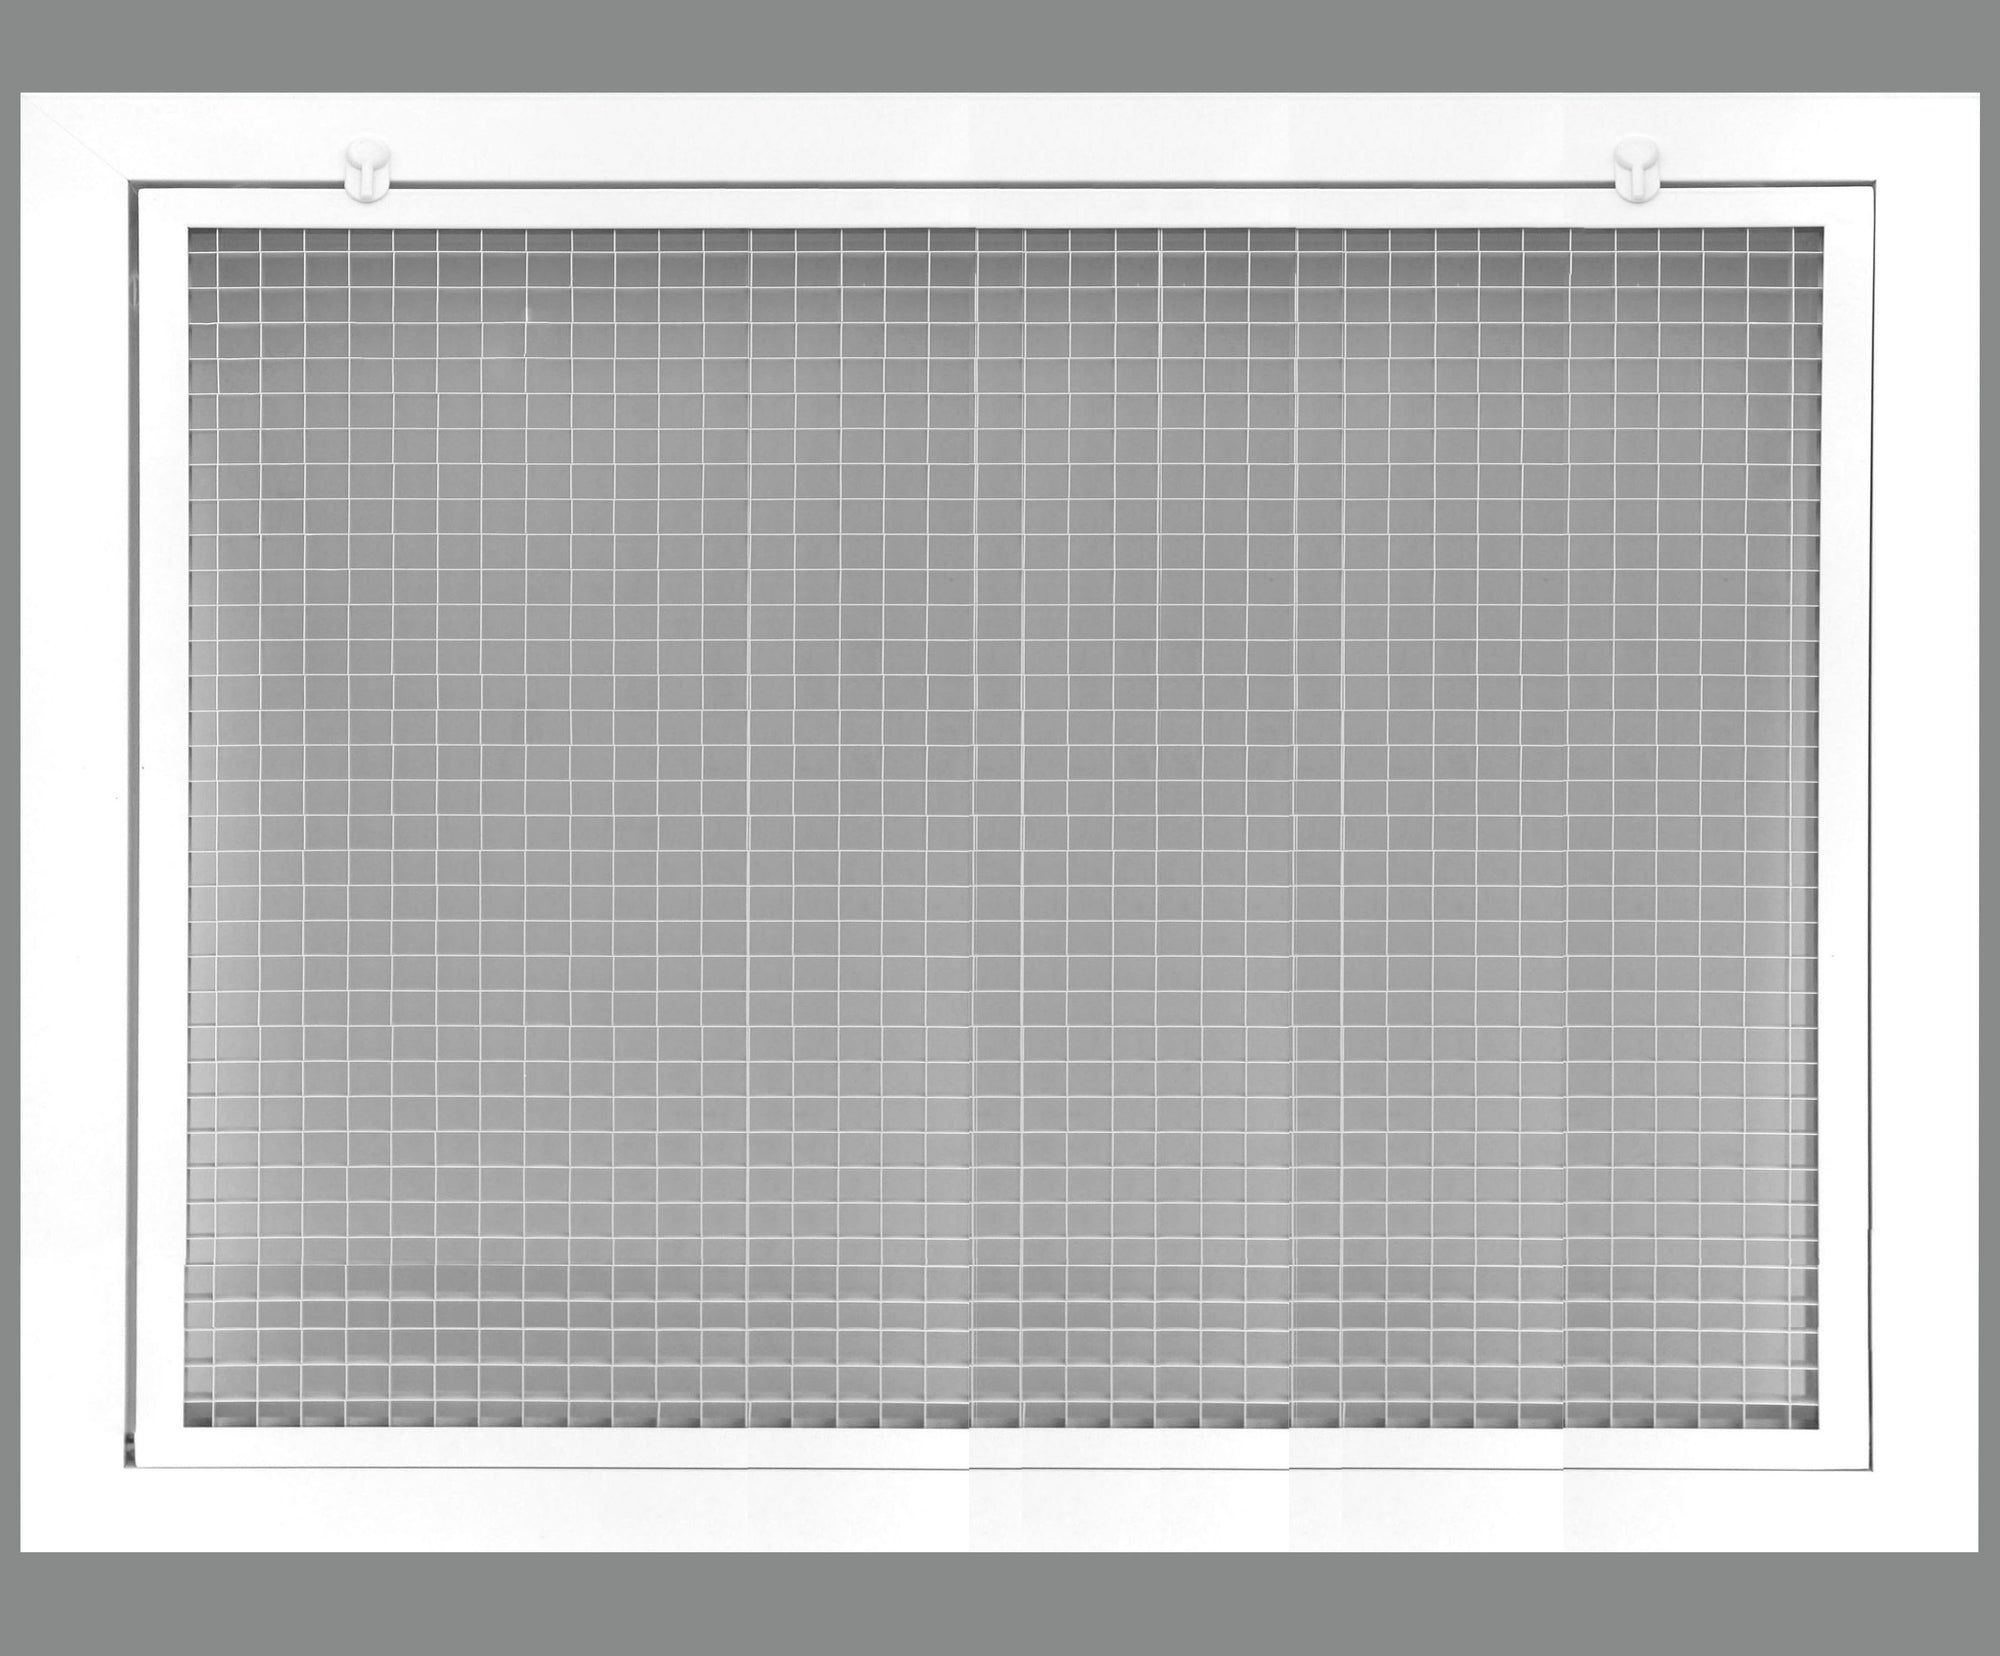 28" x 24" Cube Core Eggcrate Return Air Filter Grille for 1" Filter